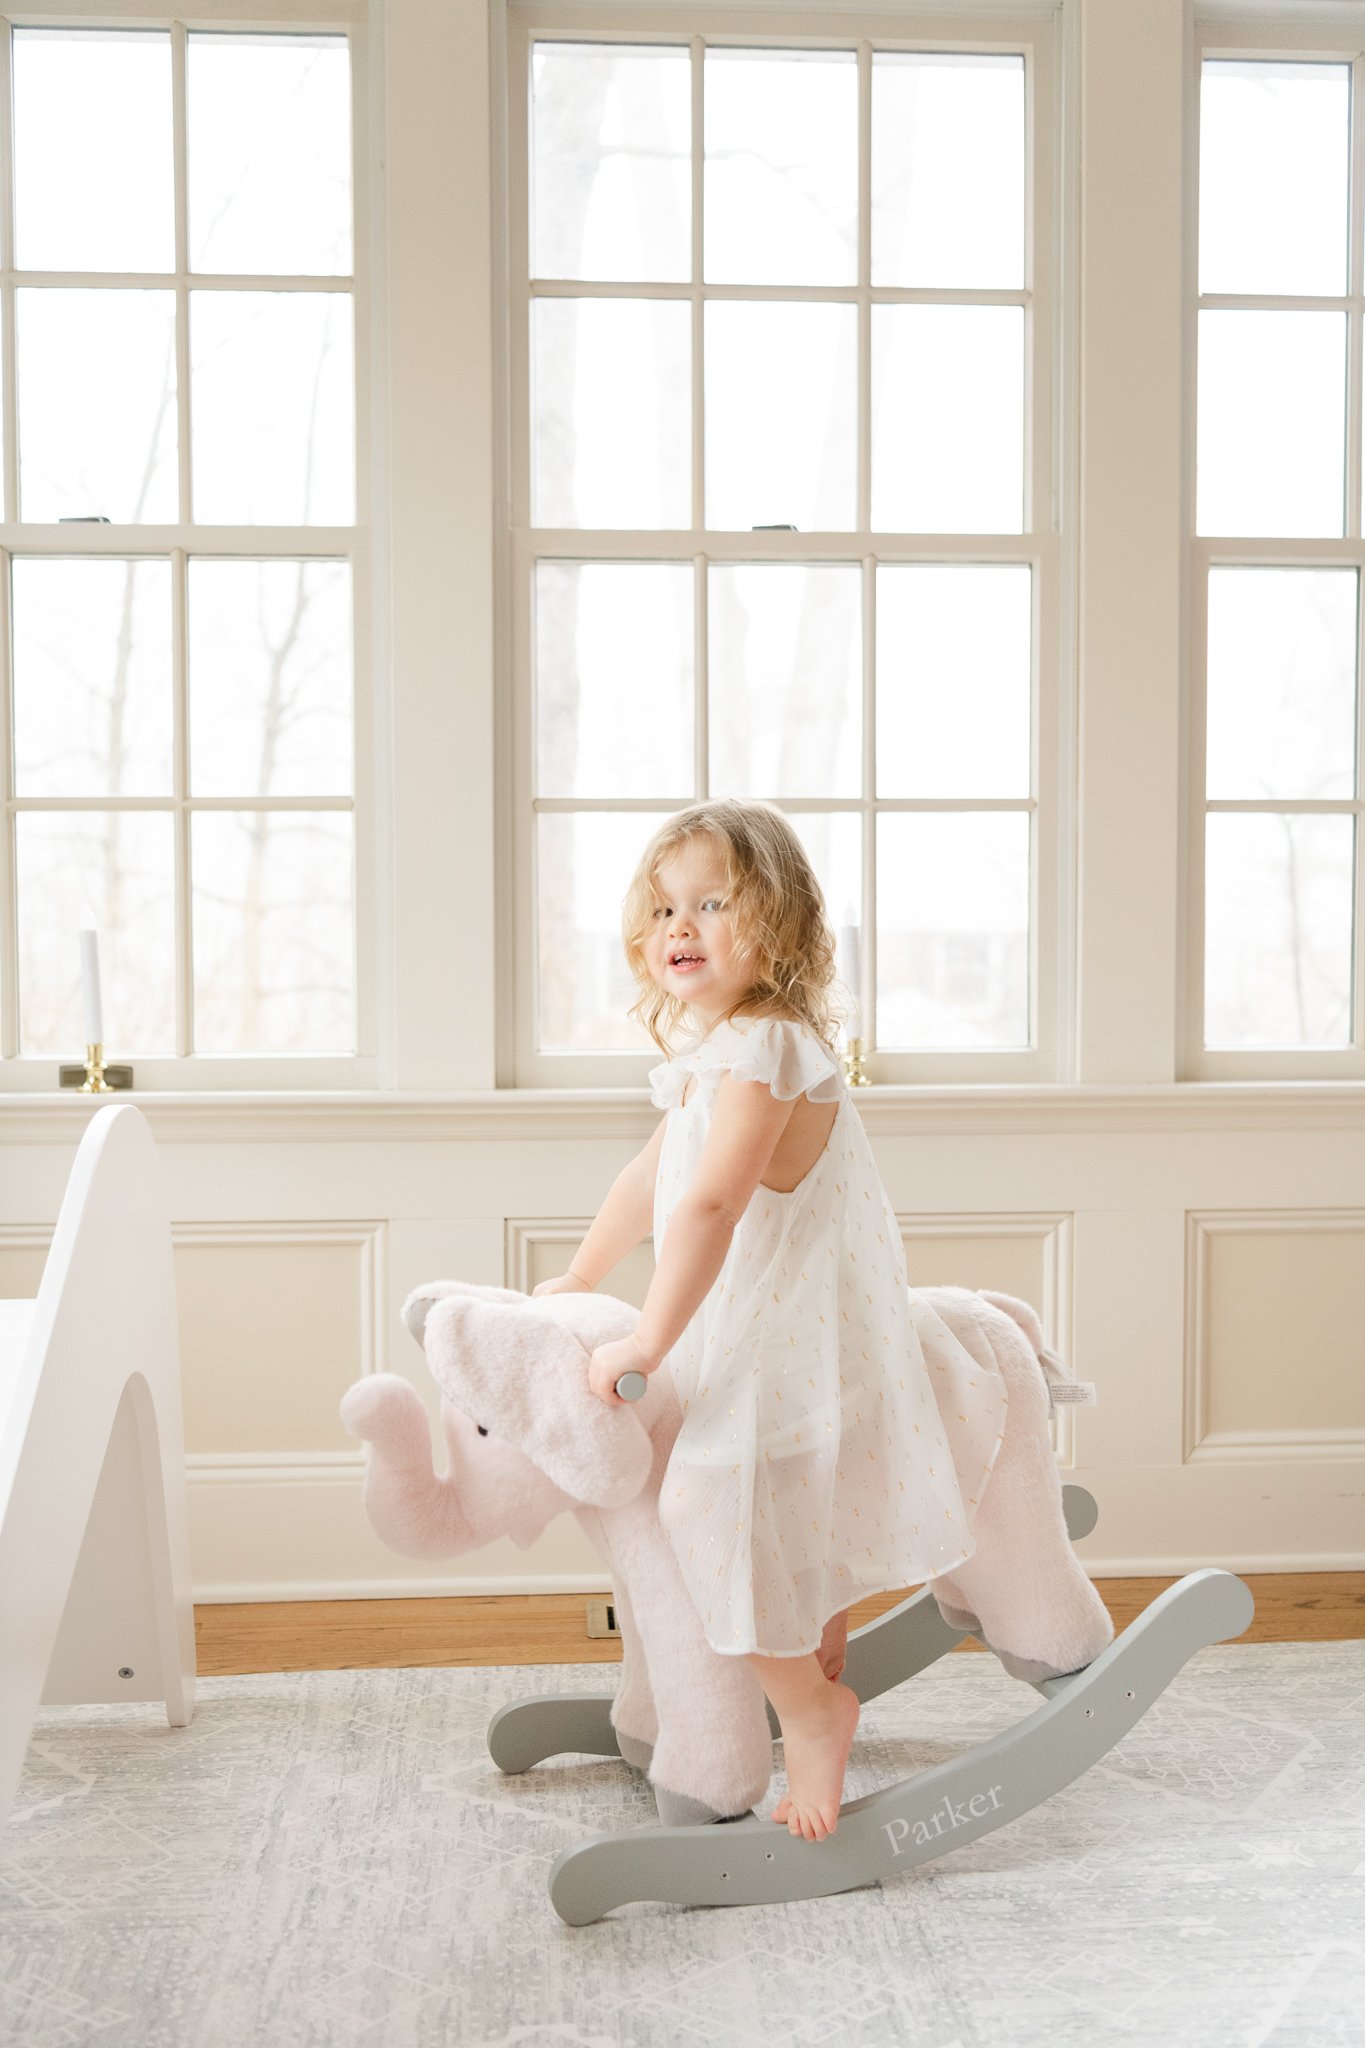  Nicole Hawkins's Photography captures a big sister playing on a wooden toy horse in the baby's nursery. rocking horse prop in home newborns toddler sister #NicoleHawkinsPhotography #NicoleHawkinsNewborns #Babygirl #Newbornfamilyportraits #ChathamNew